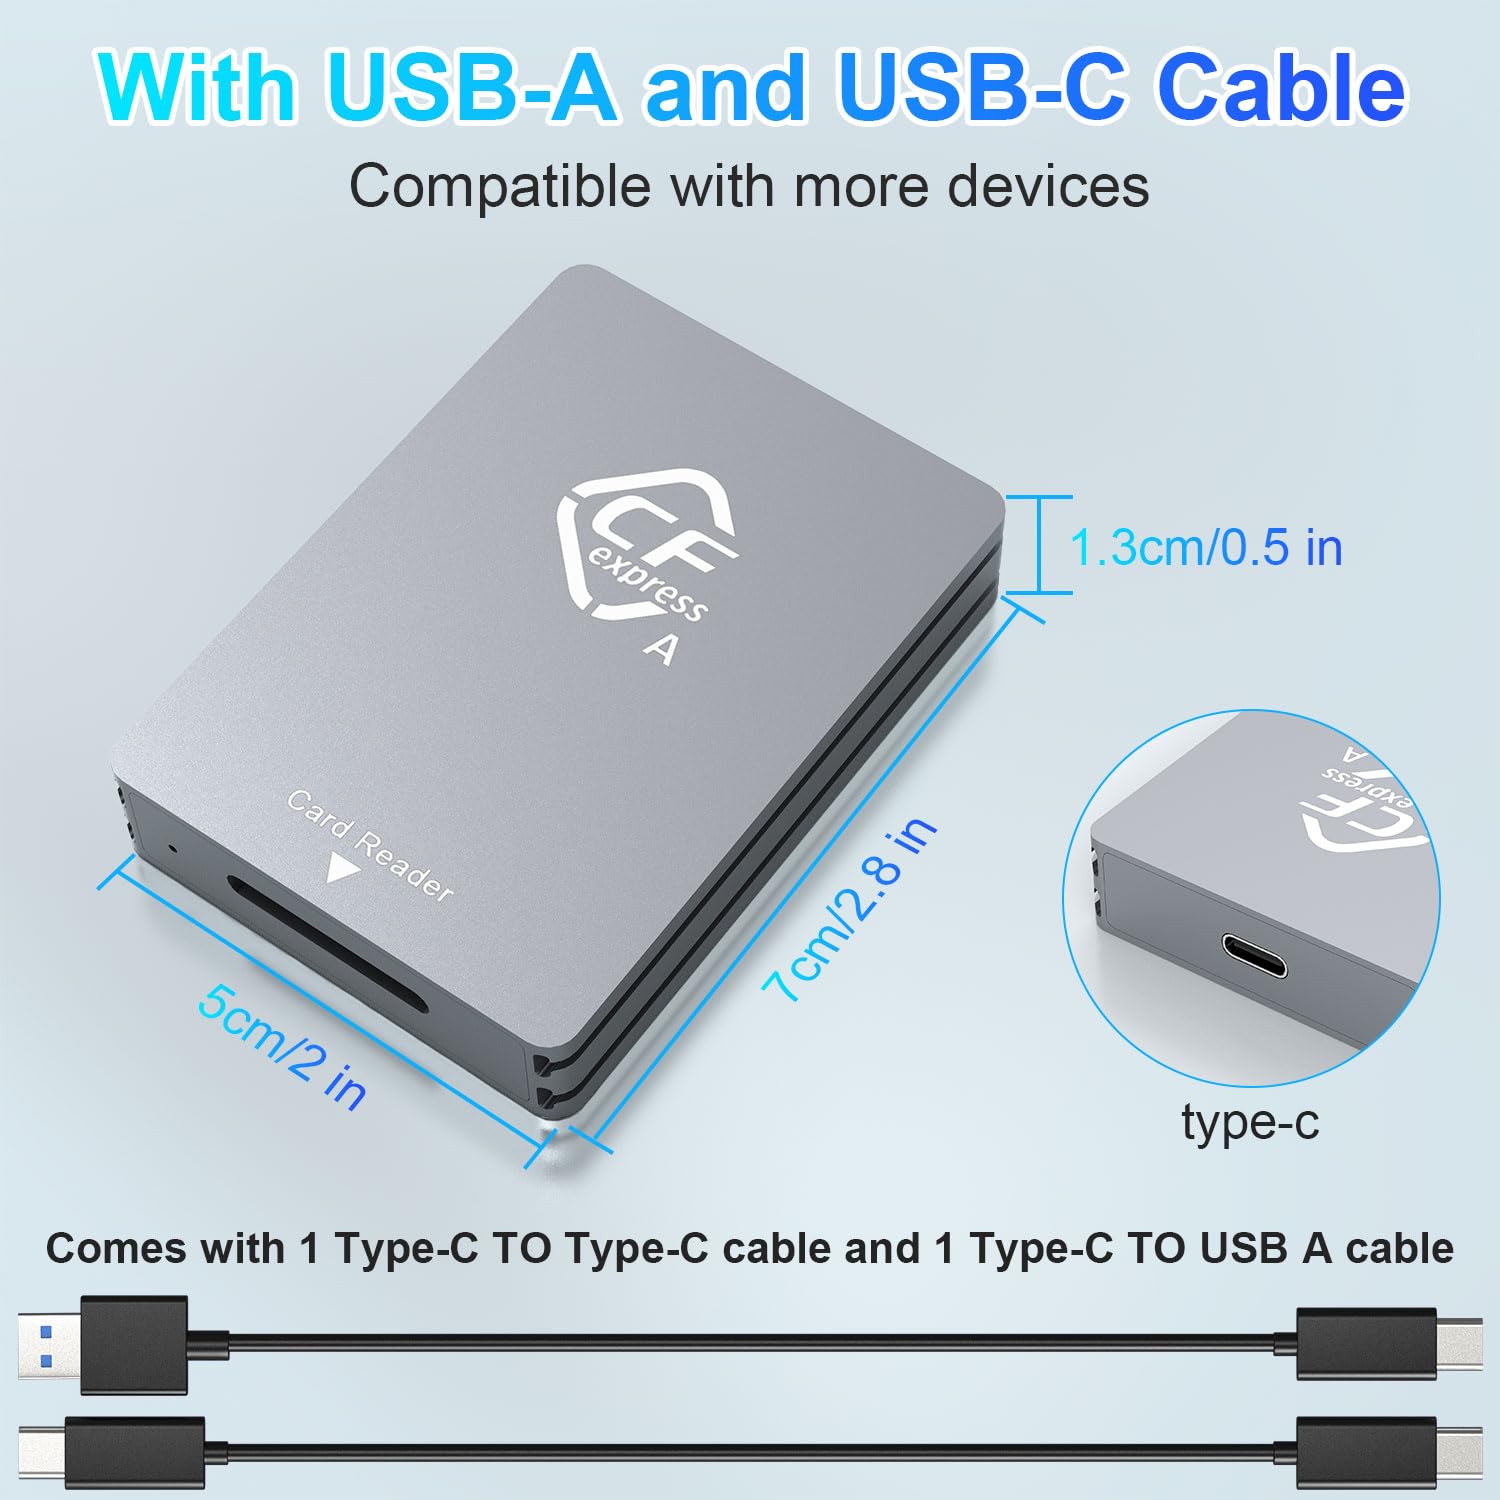 CFexpress Type A Card Reader,USB 3.2 Gen 2 10Gbps SuperSpeed CFexpress Type A Memory Card Adapter,Portable Aluminum Sony CFexpress Type A Reader with USB C to USB C/USB A Cable